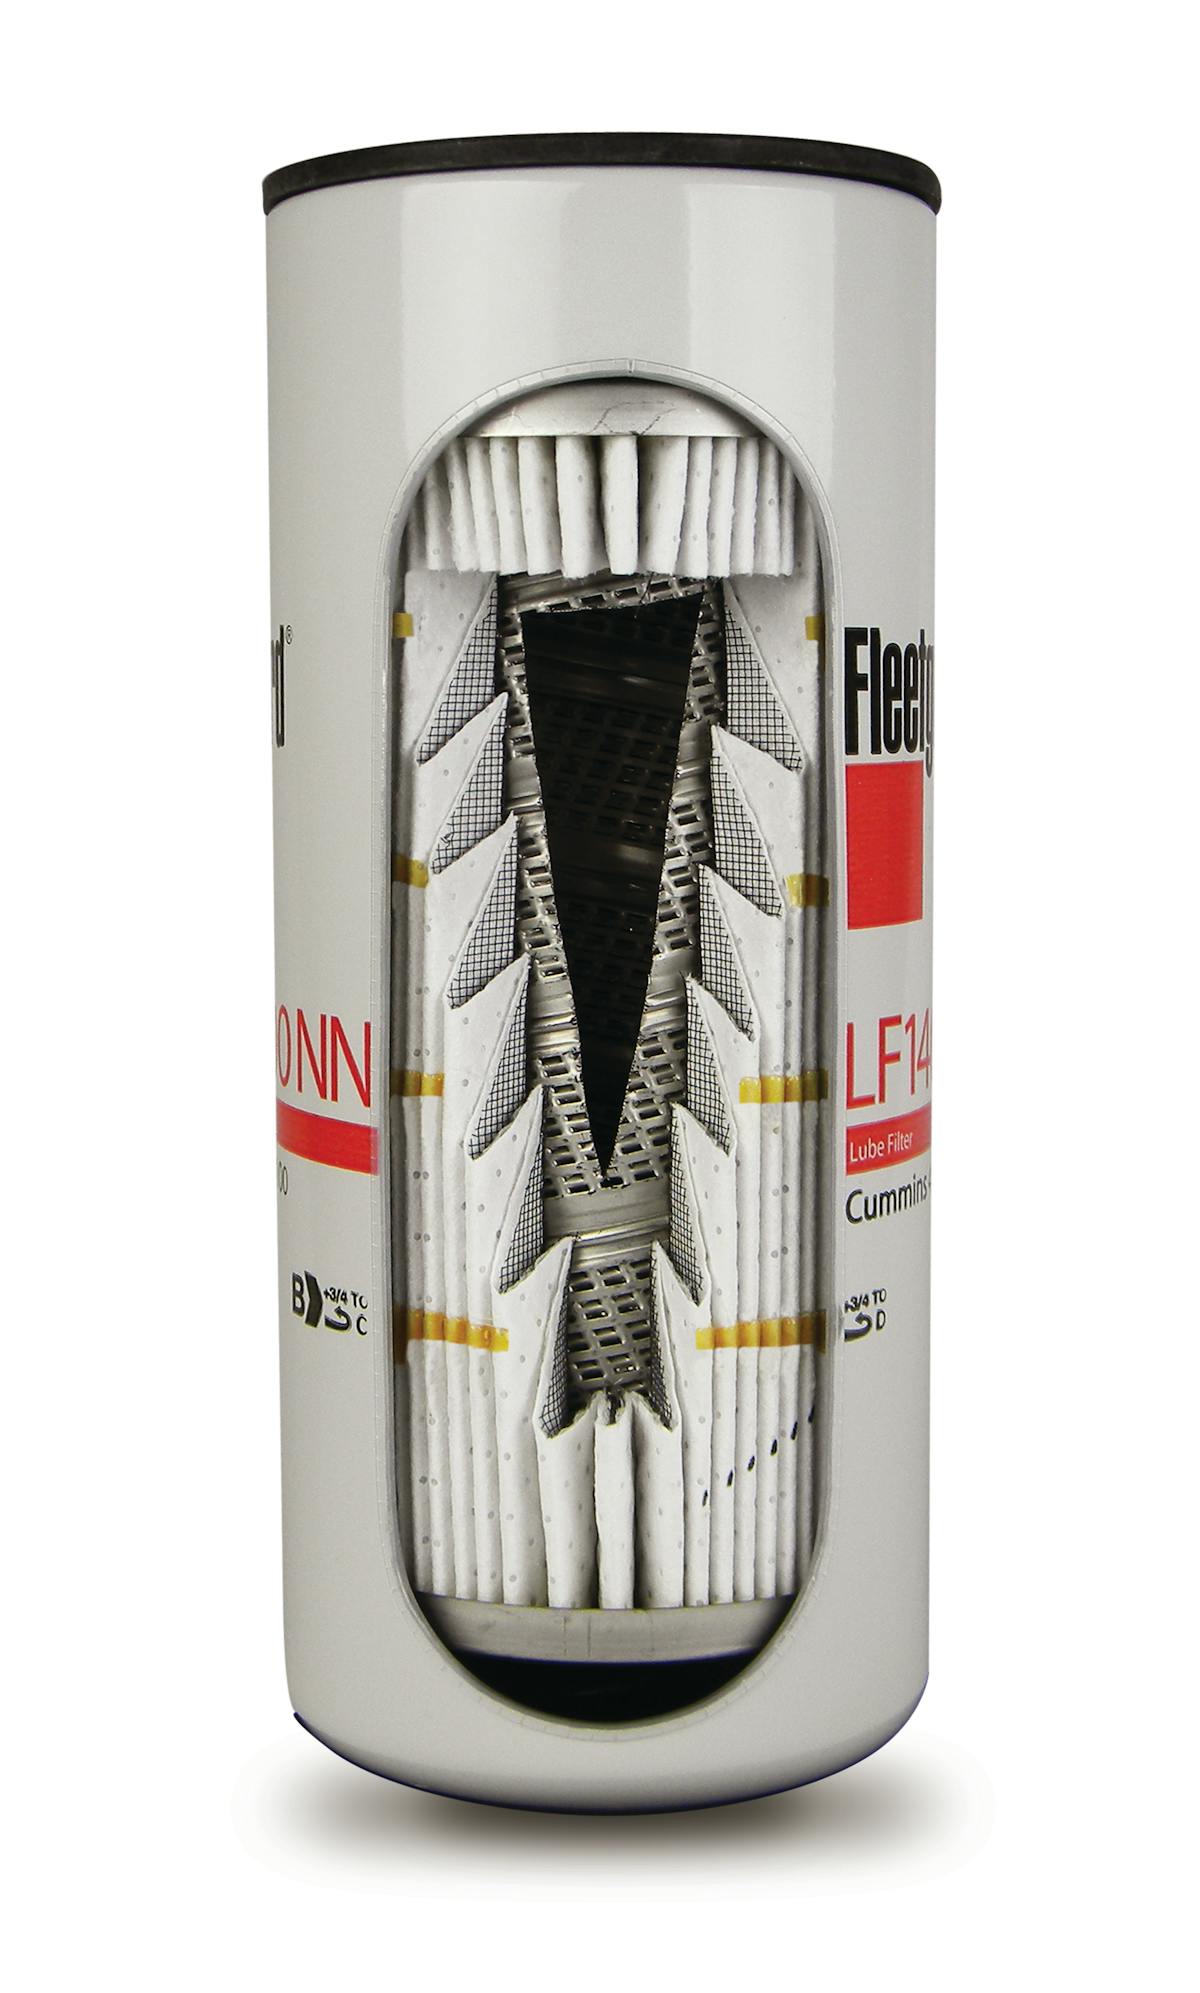 A cutaway of a Fleetguard LF14000NN lube filter shows two levels of filtration: StrataPore media on top removes larger particles during engine start-up, while the NanoNet media below captures smaller particles to prevent long-term engine wear.